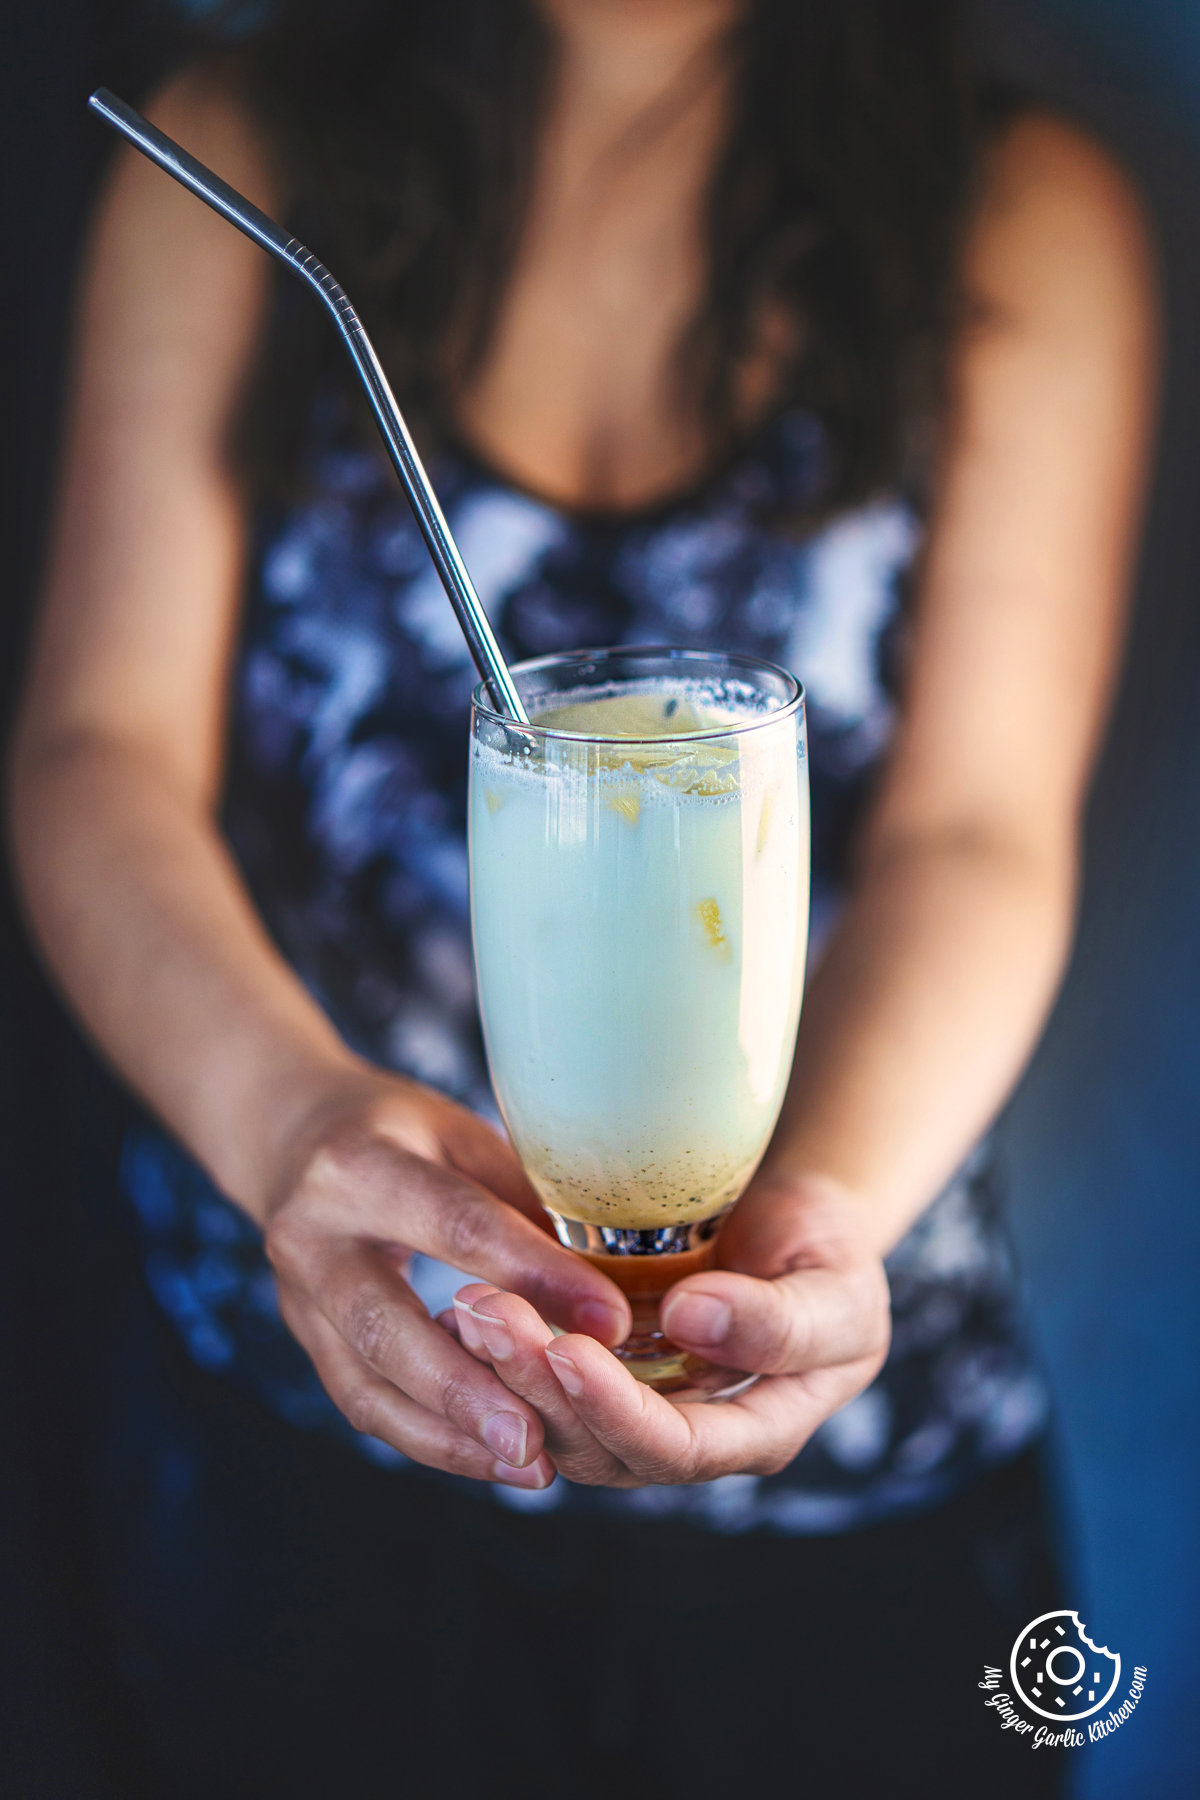 photo of a woman holding a transparent glass of badam sharbat with a metal straw